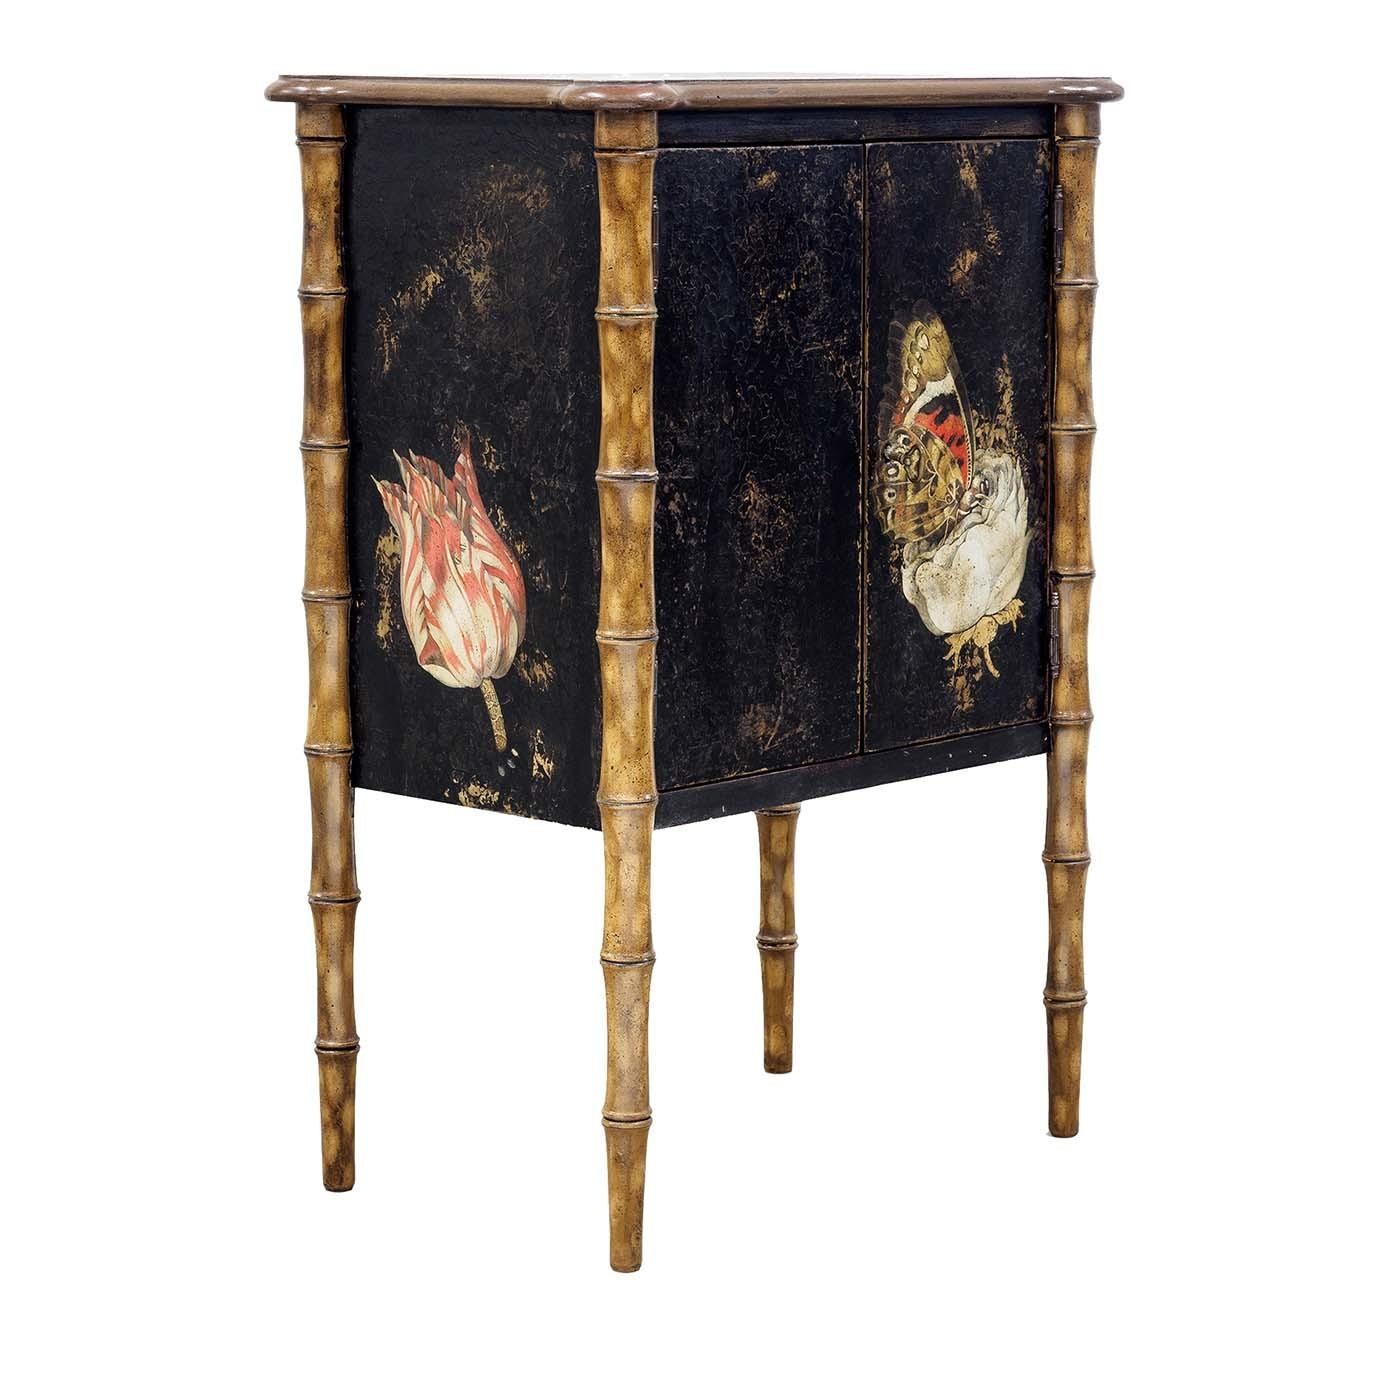 Entirely decorated by hand with Venetian style techniques, the Lombardia bedside table is custom made. The colors and decorations can be customized according to the customer's needs, to perfectly match the style of their decor. It is also possible